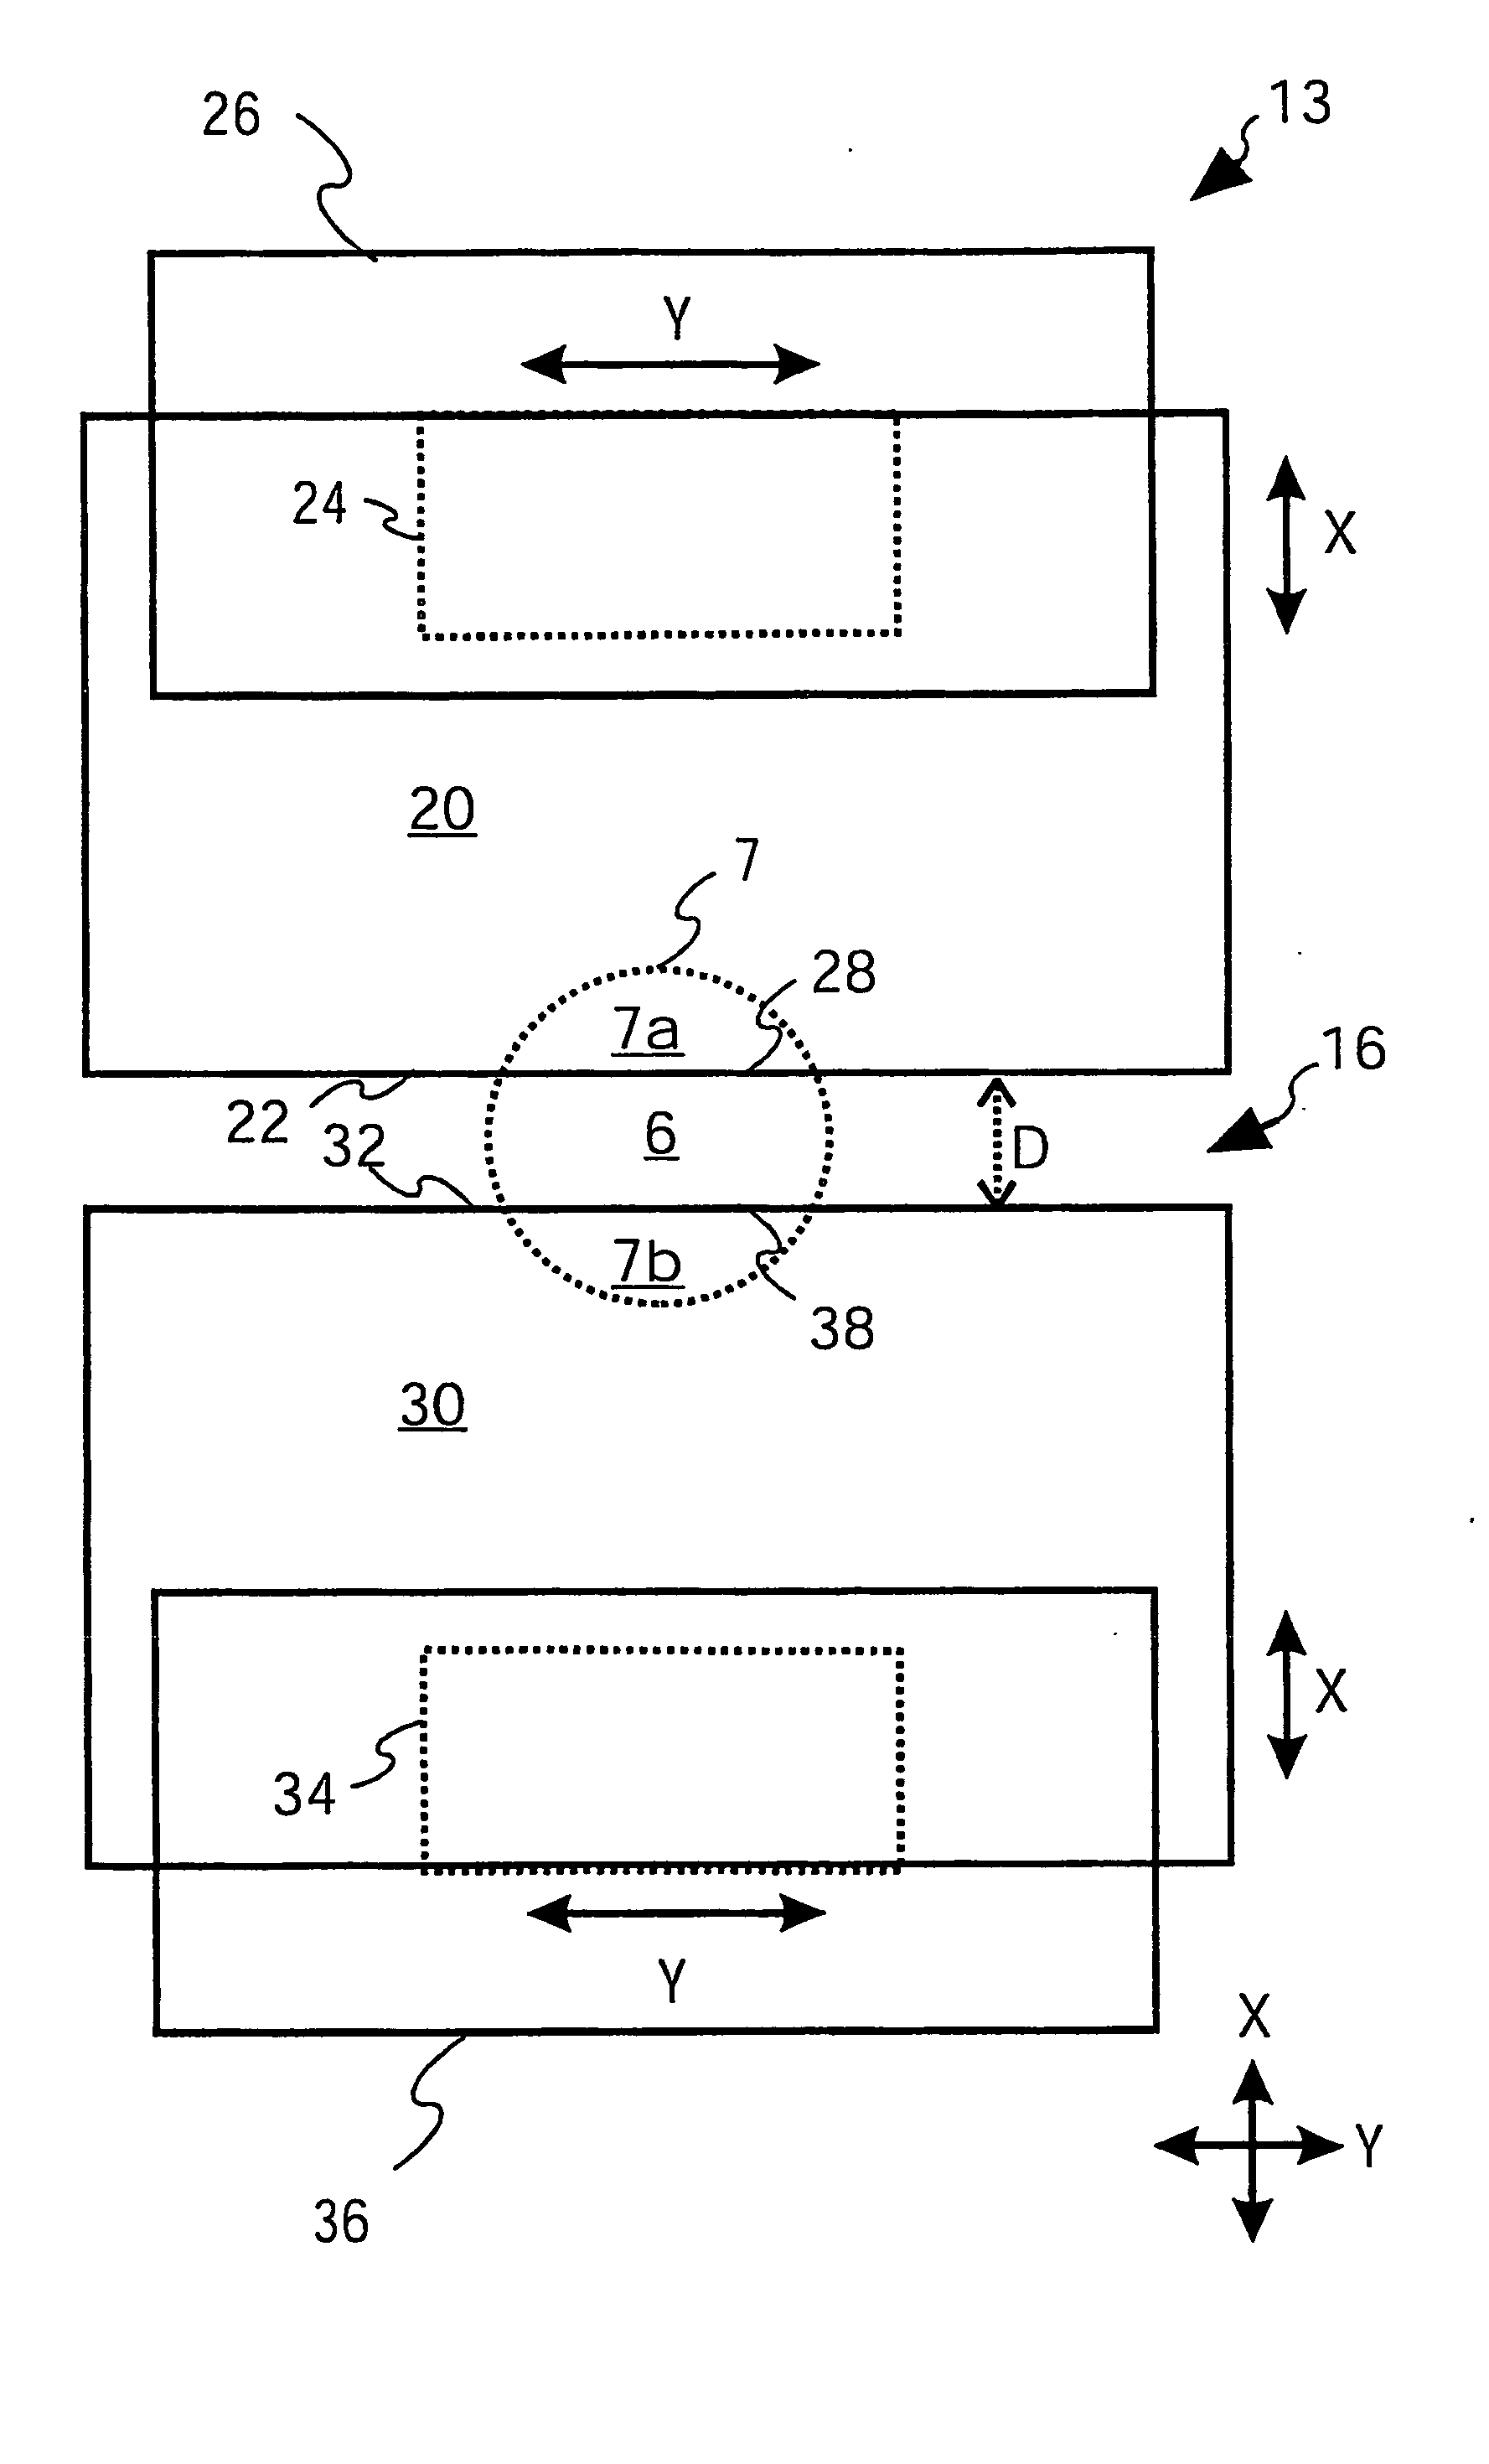 Charged Particle Beam Device with Aperture